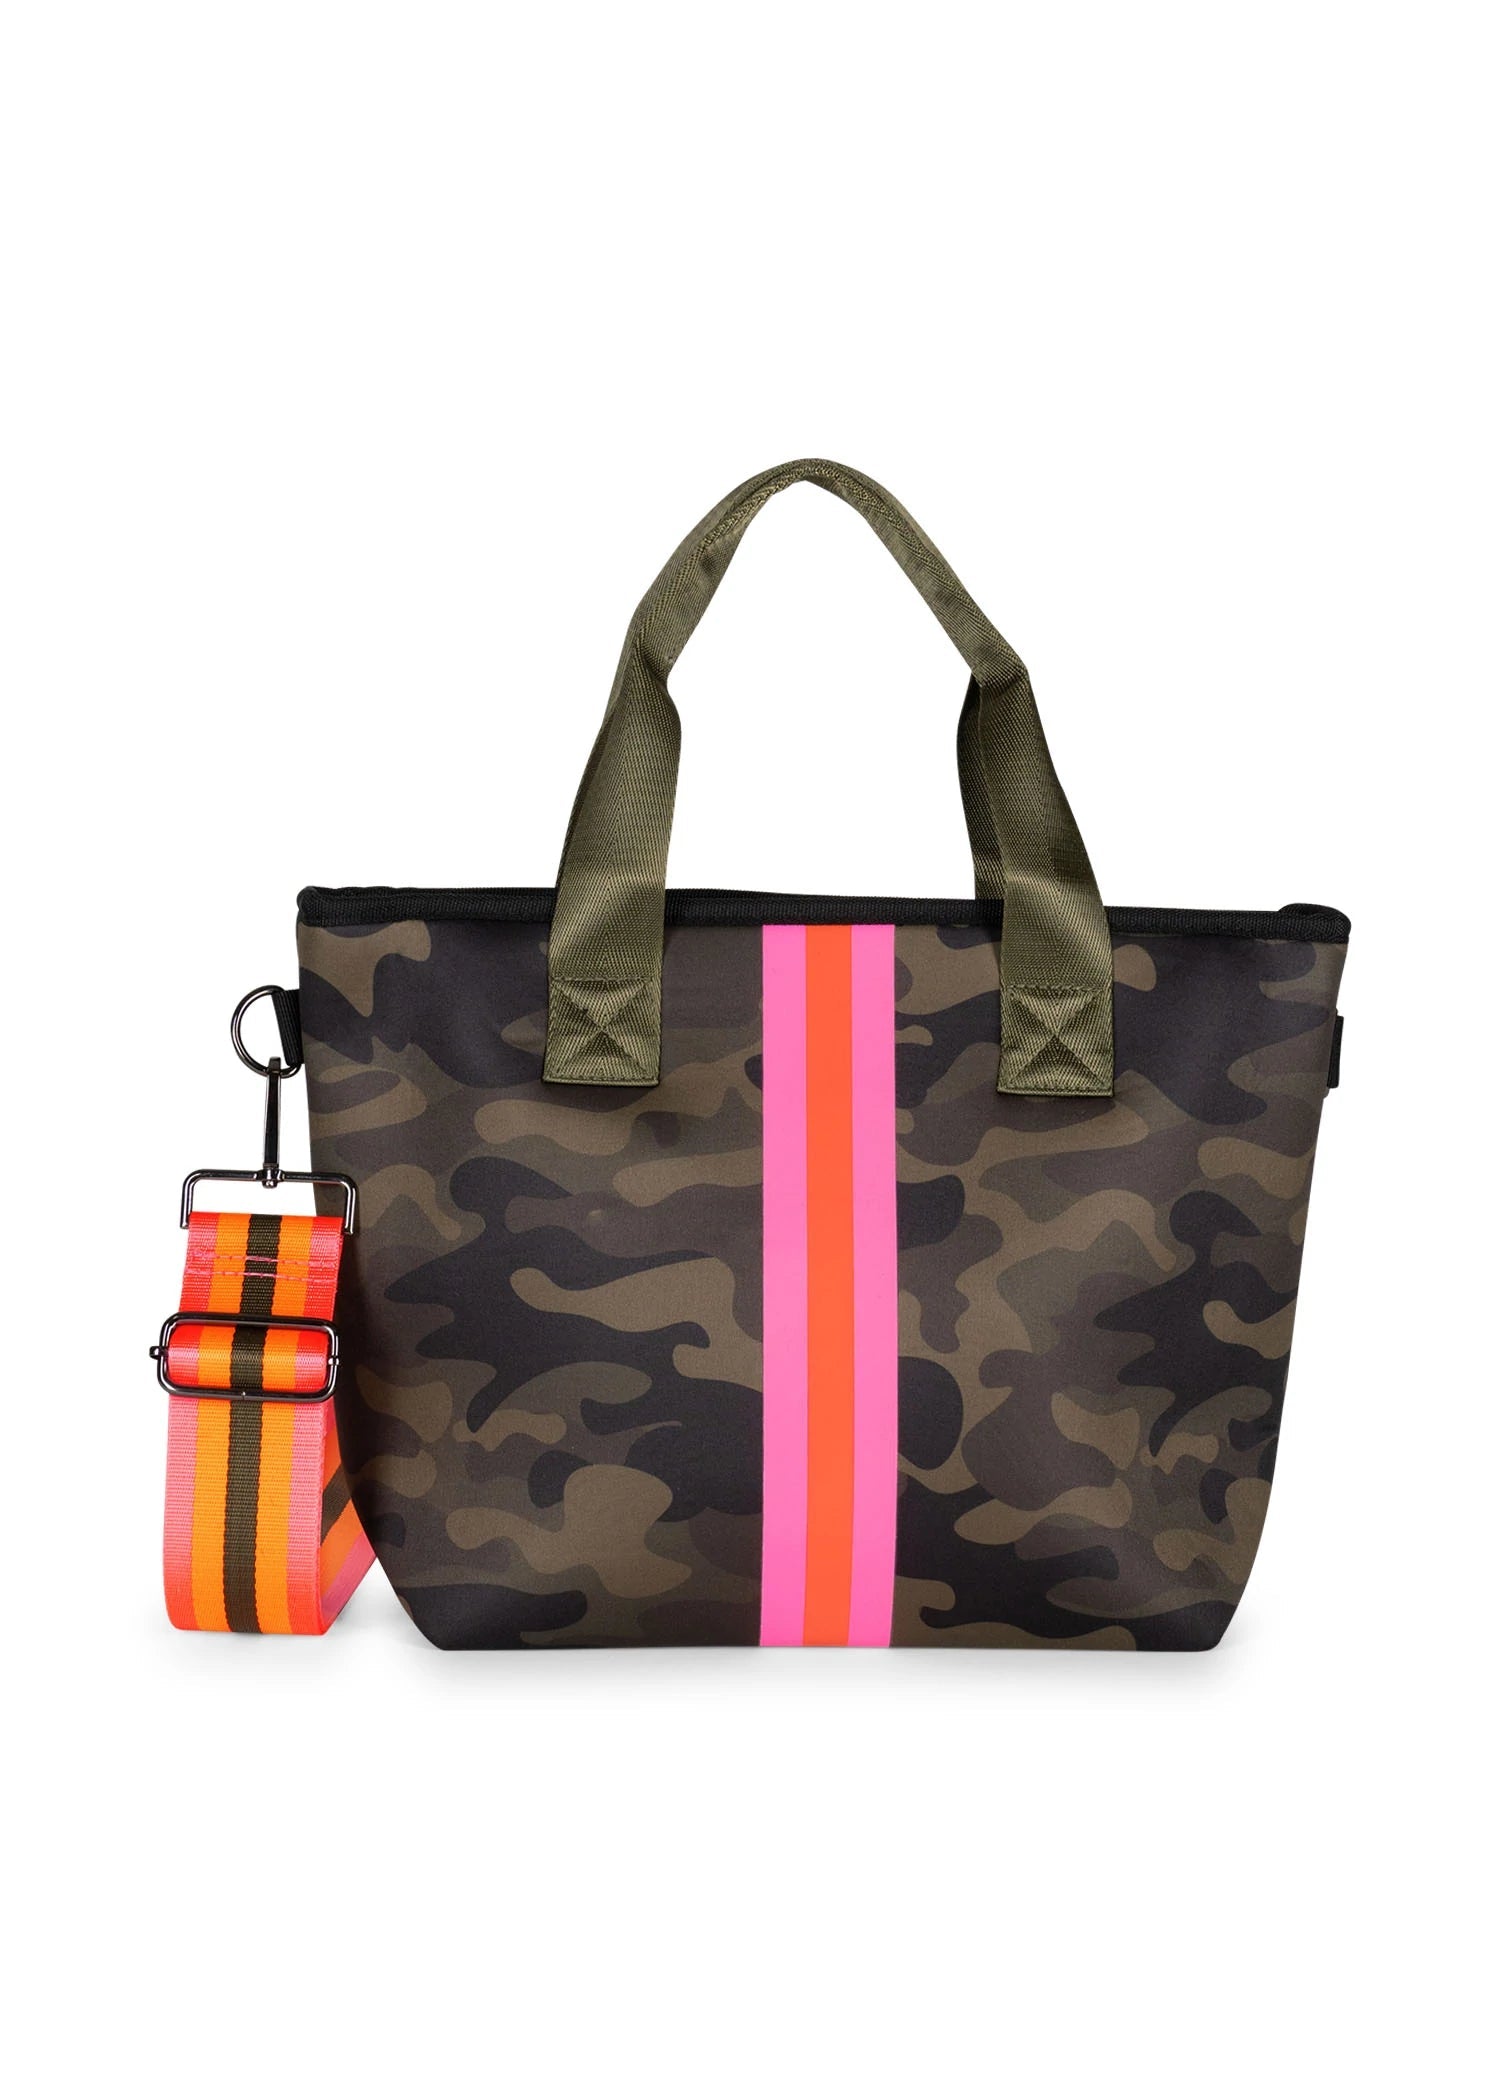 Neoprene Tote Large Blue Camo with Hot Pink Racer Stripe- Beach Bag, Gym Bag, Yoga, Tennis, Tote Bag Carry All